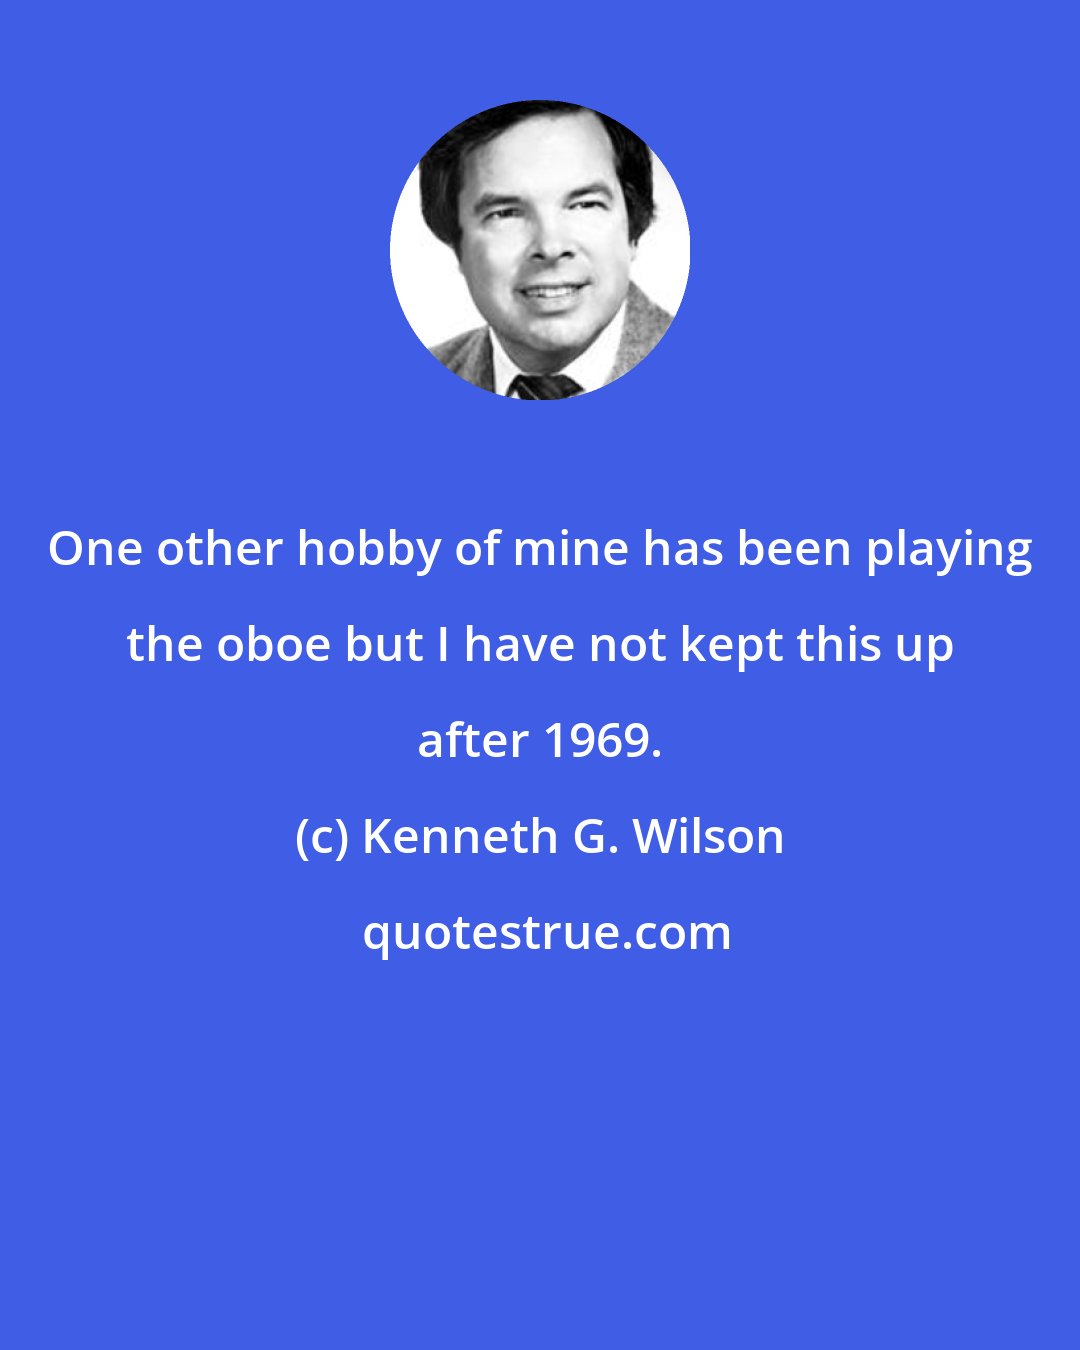 Kenneth G. Wilson: One other hobby of mine has been playing the oboe but I have not kept this up after 1969.